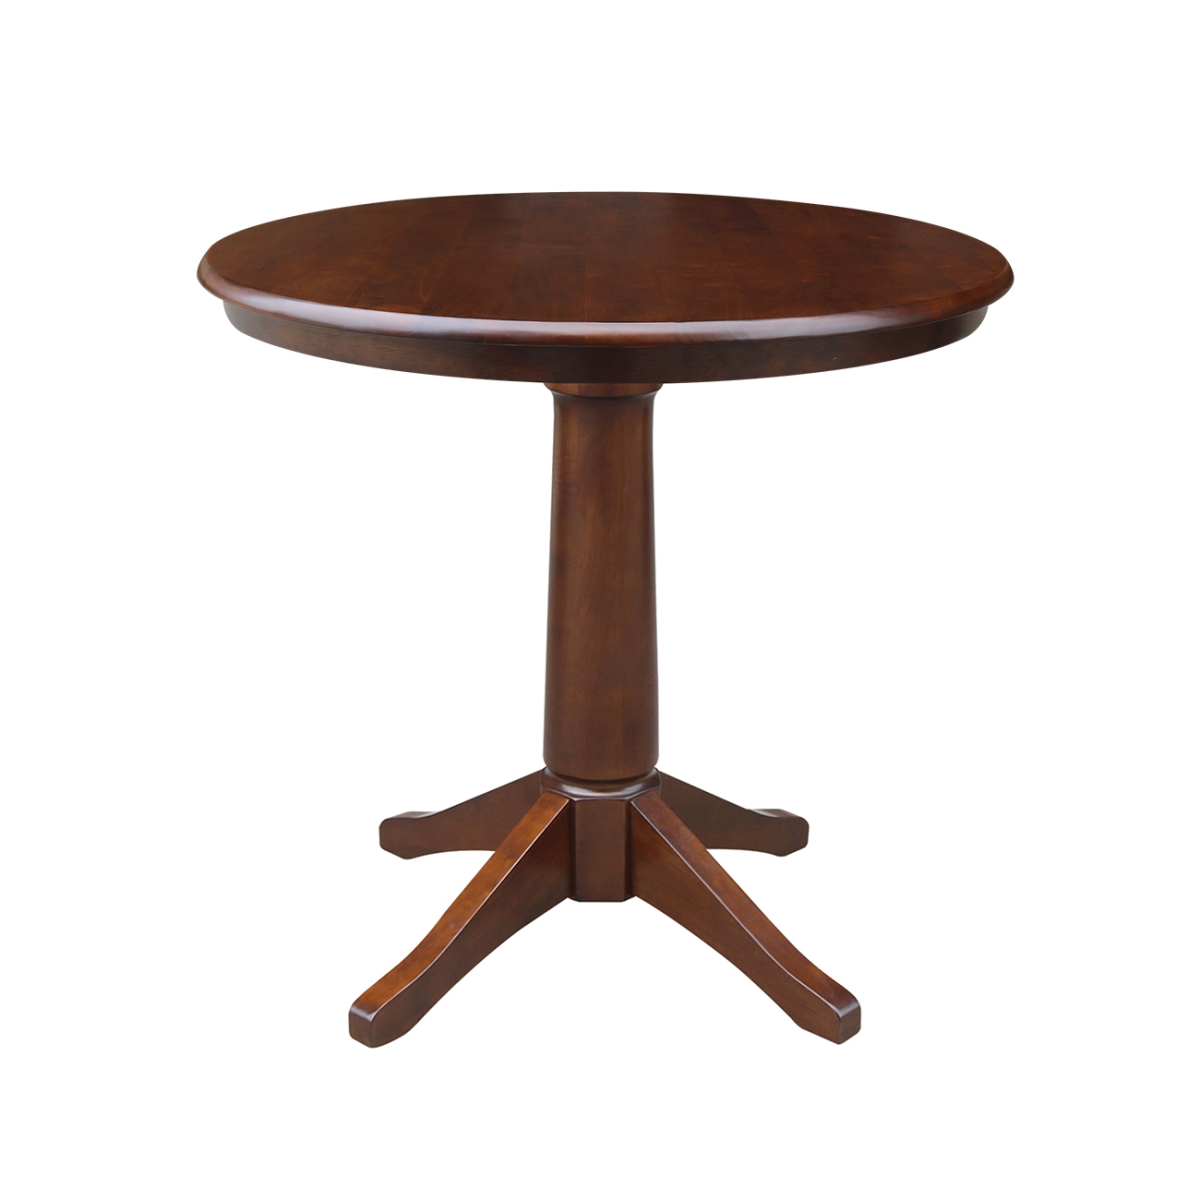 K581-36rt-27b 28.9 X 36 In. Round Top Pedestal Dining Table - Espresso